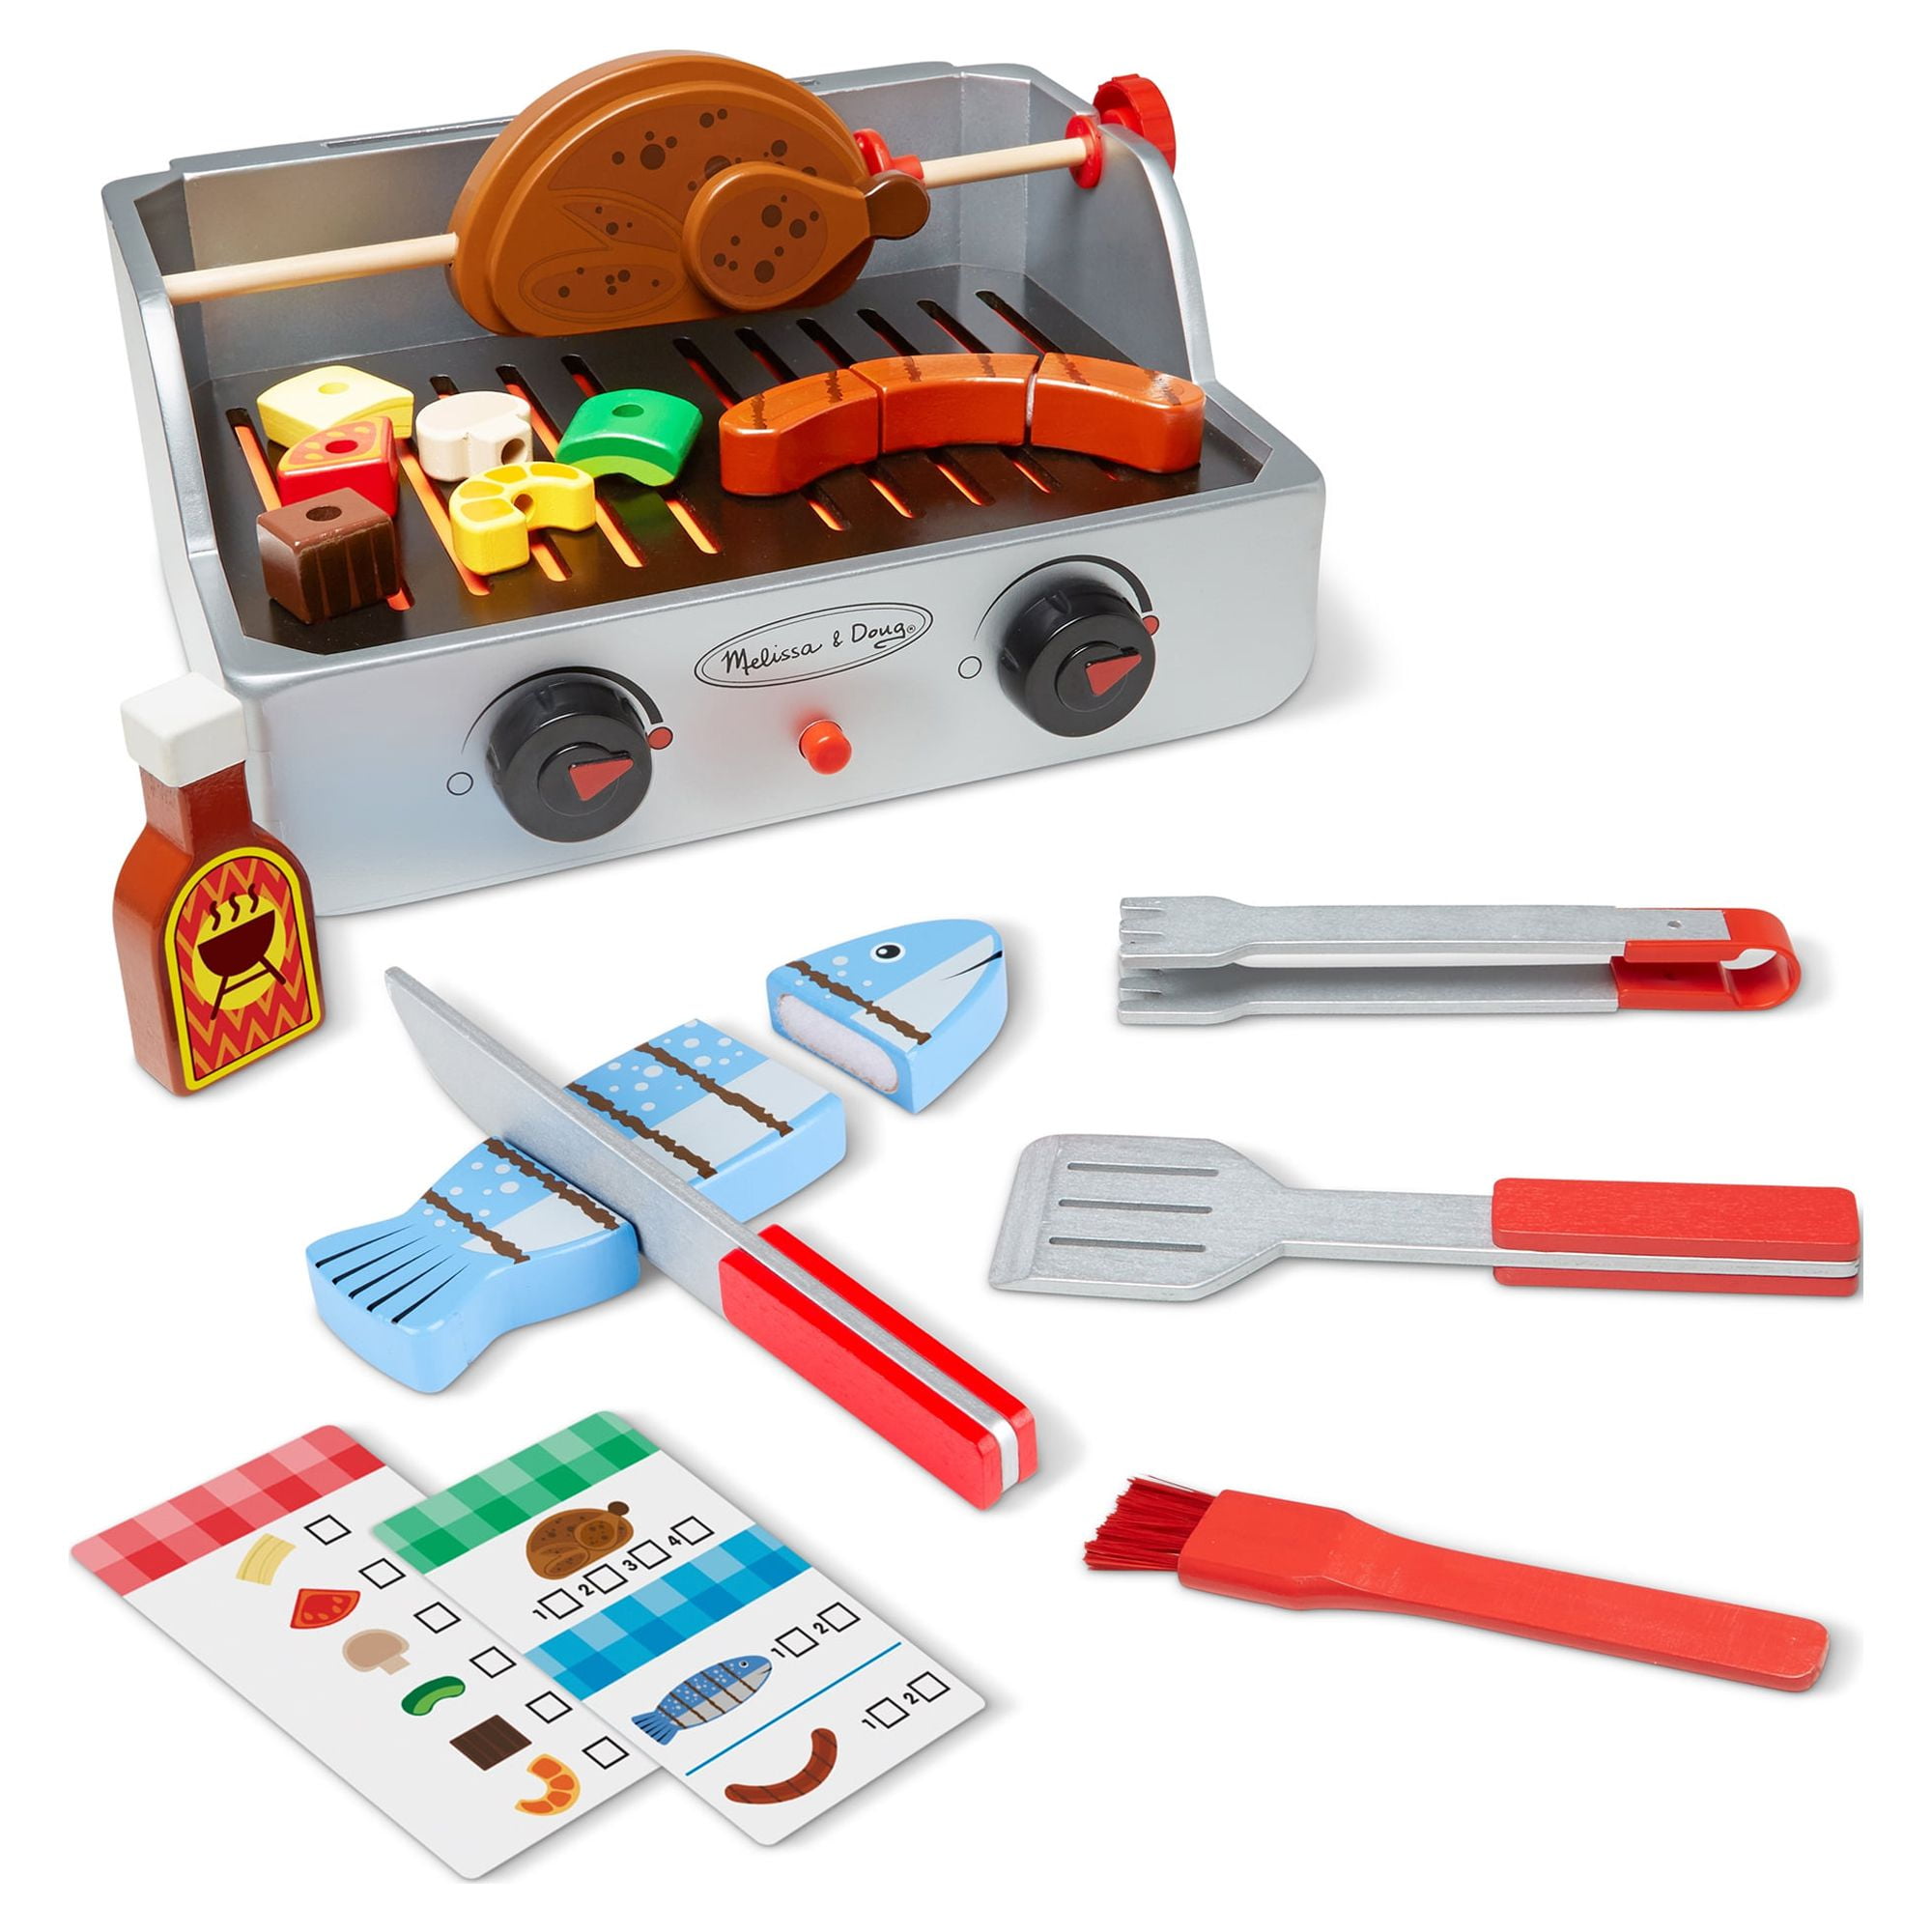 Melissa & Doug Slice and Bake Wooden Cookie Play Food Set - Pretend Cookies  And Baking Sheet, Wooden Play Food Set, Toy Baking Set For Kids Ages 3+